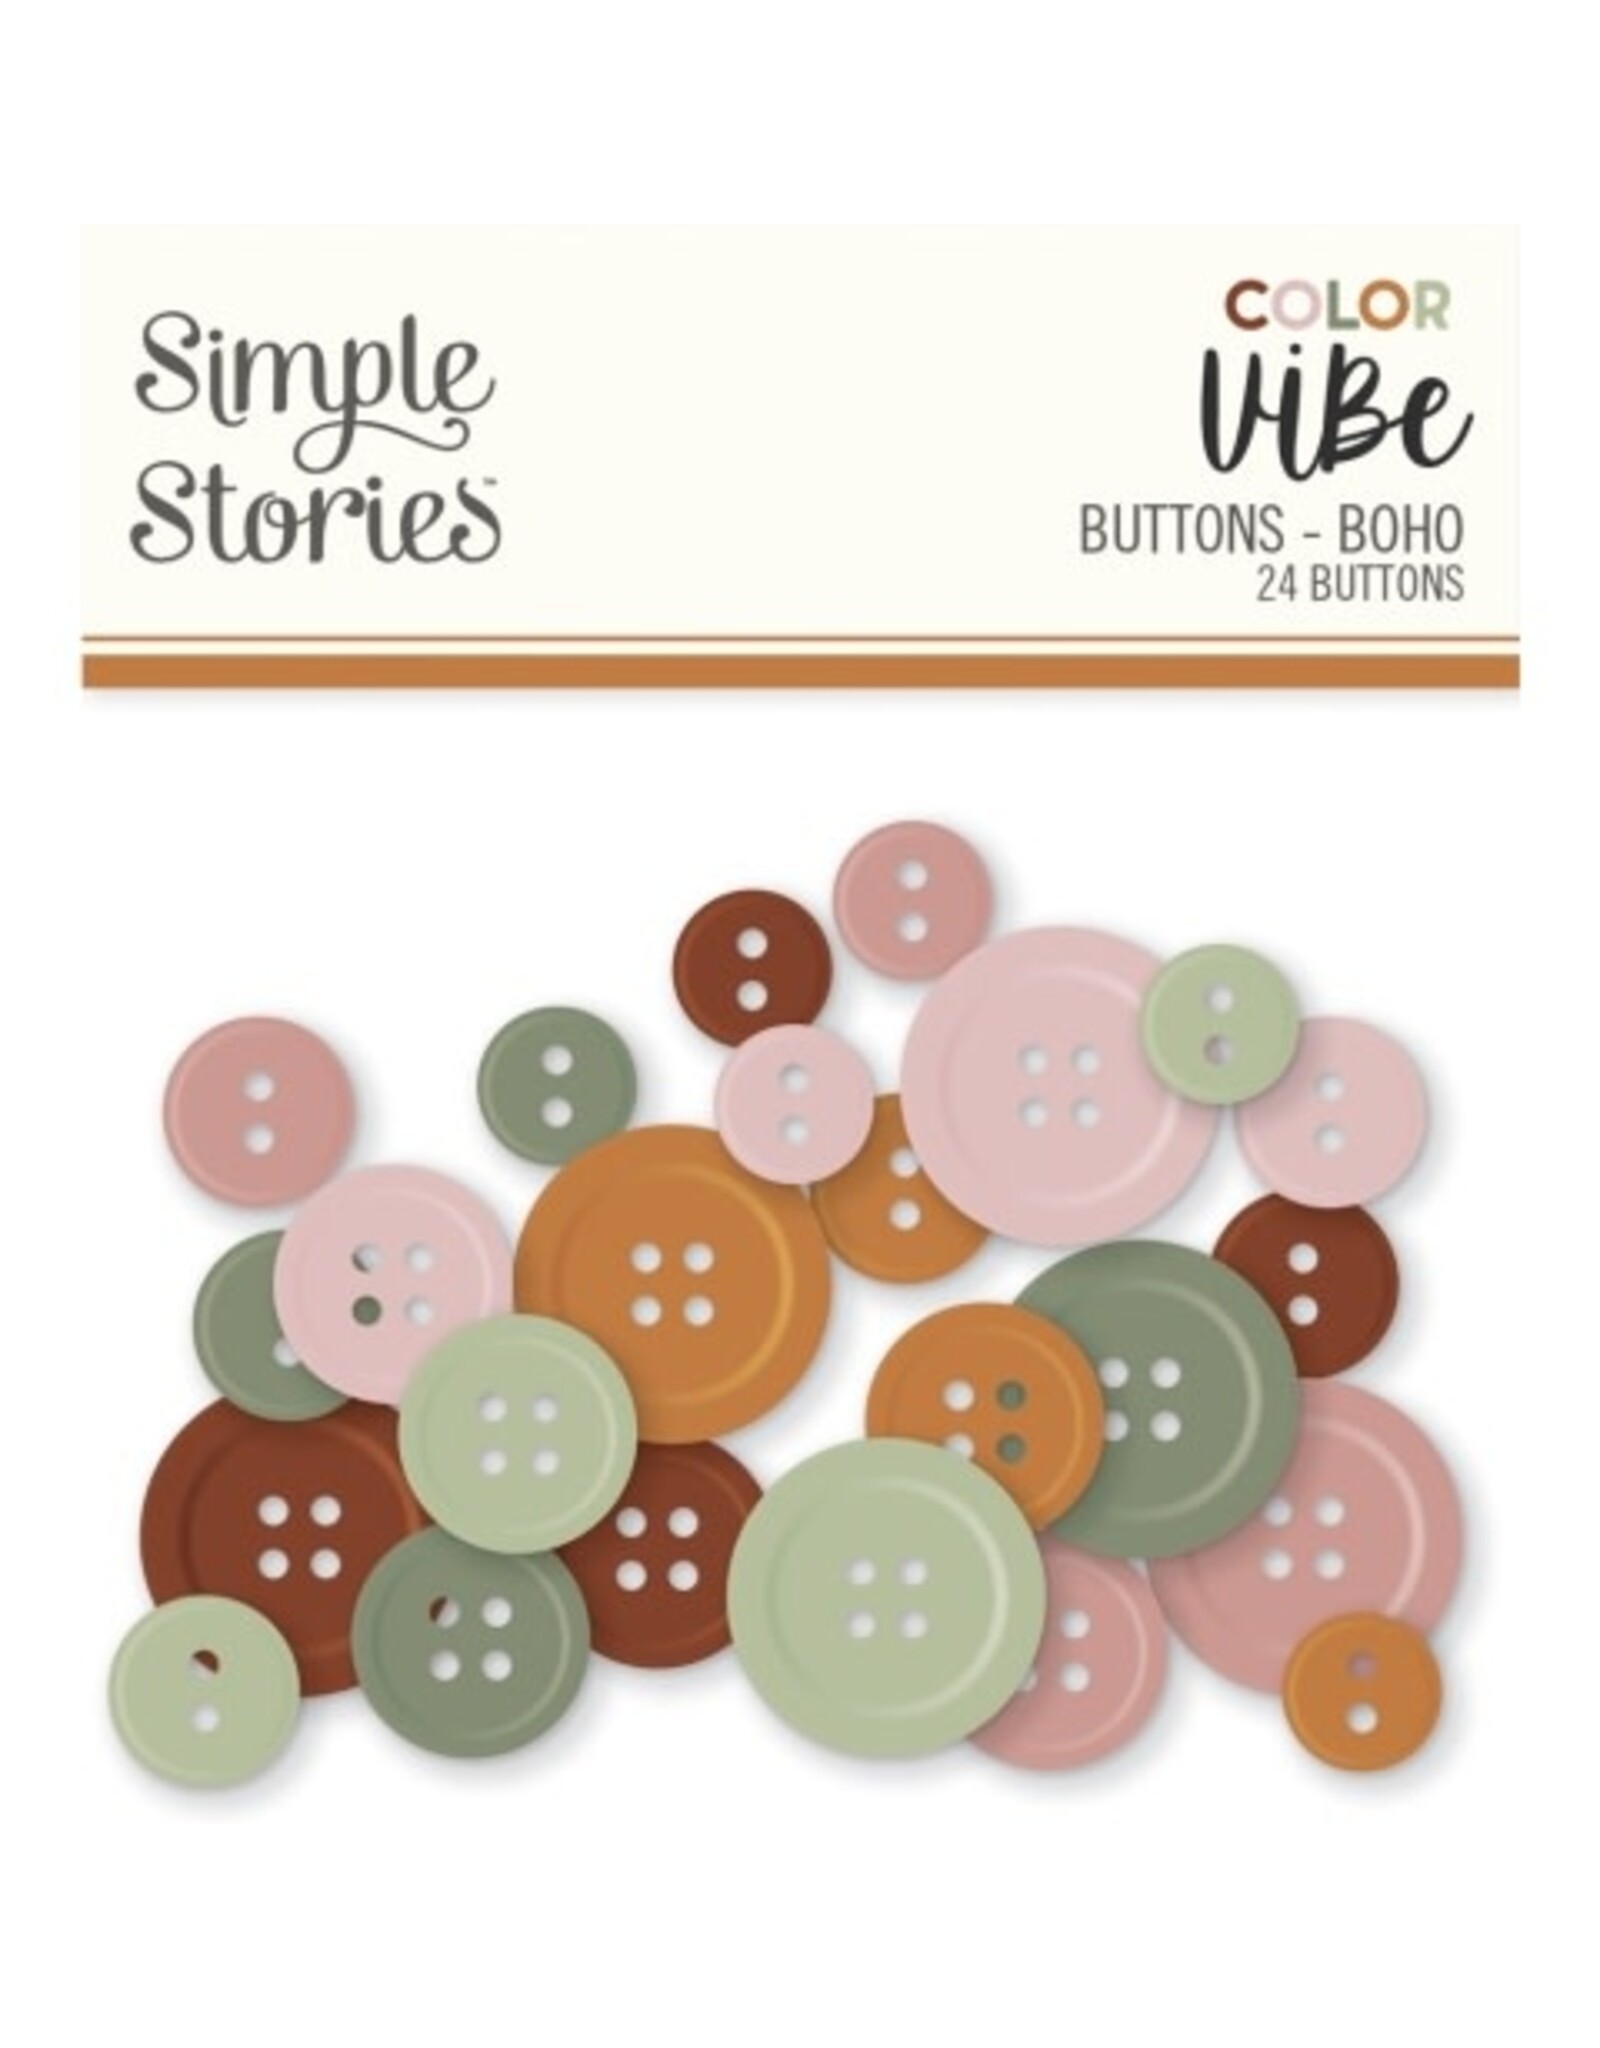 Simple Stories Color Vibe Buttons - Boho